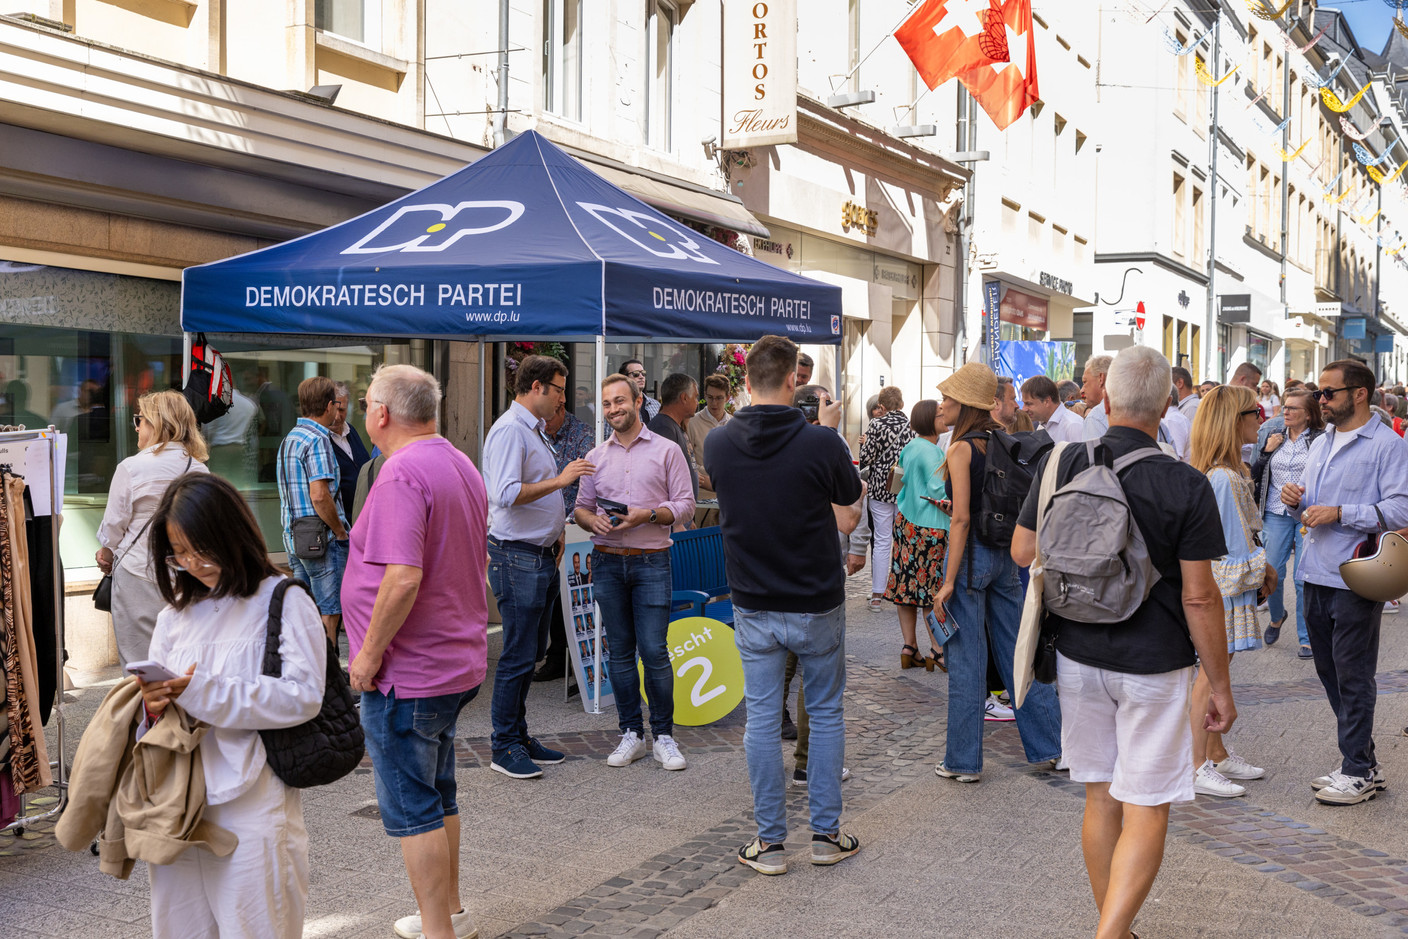 The DP stall in Luxembourg City-Centre during the braderie (street market), 4 September 2023. Photo: Romain Gamba / Maison Moderne